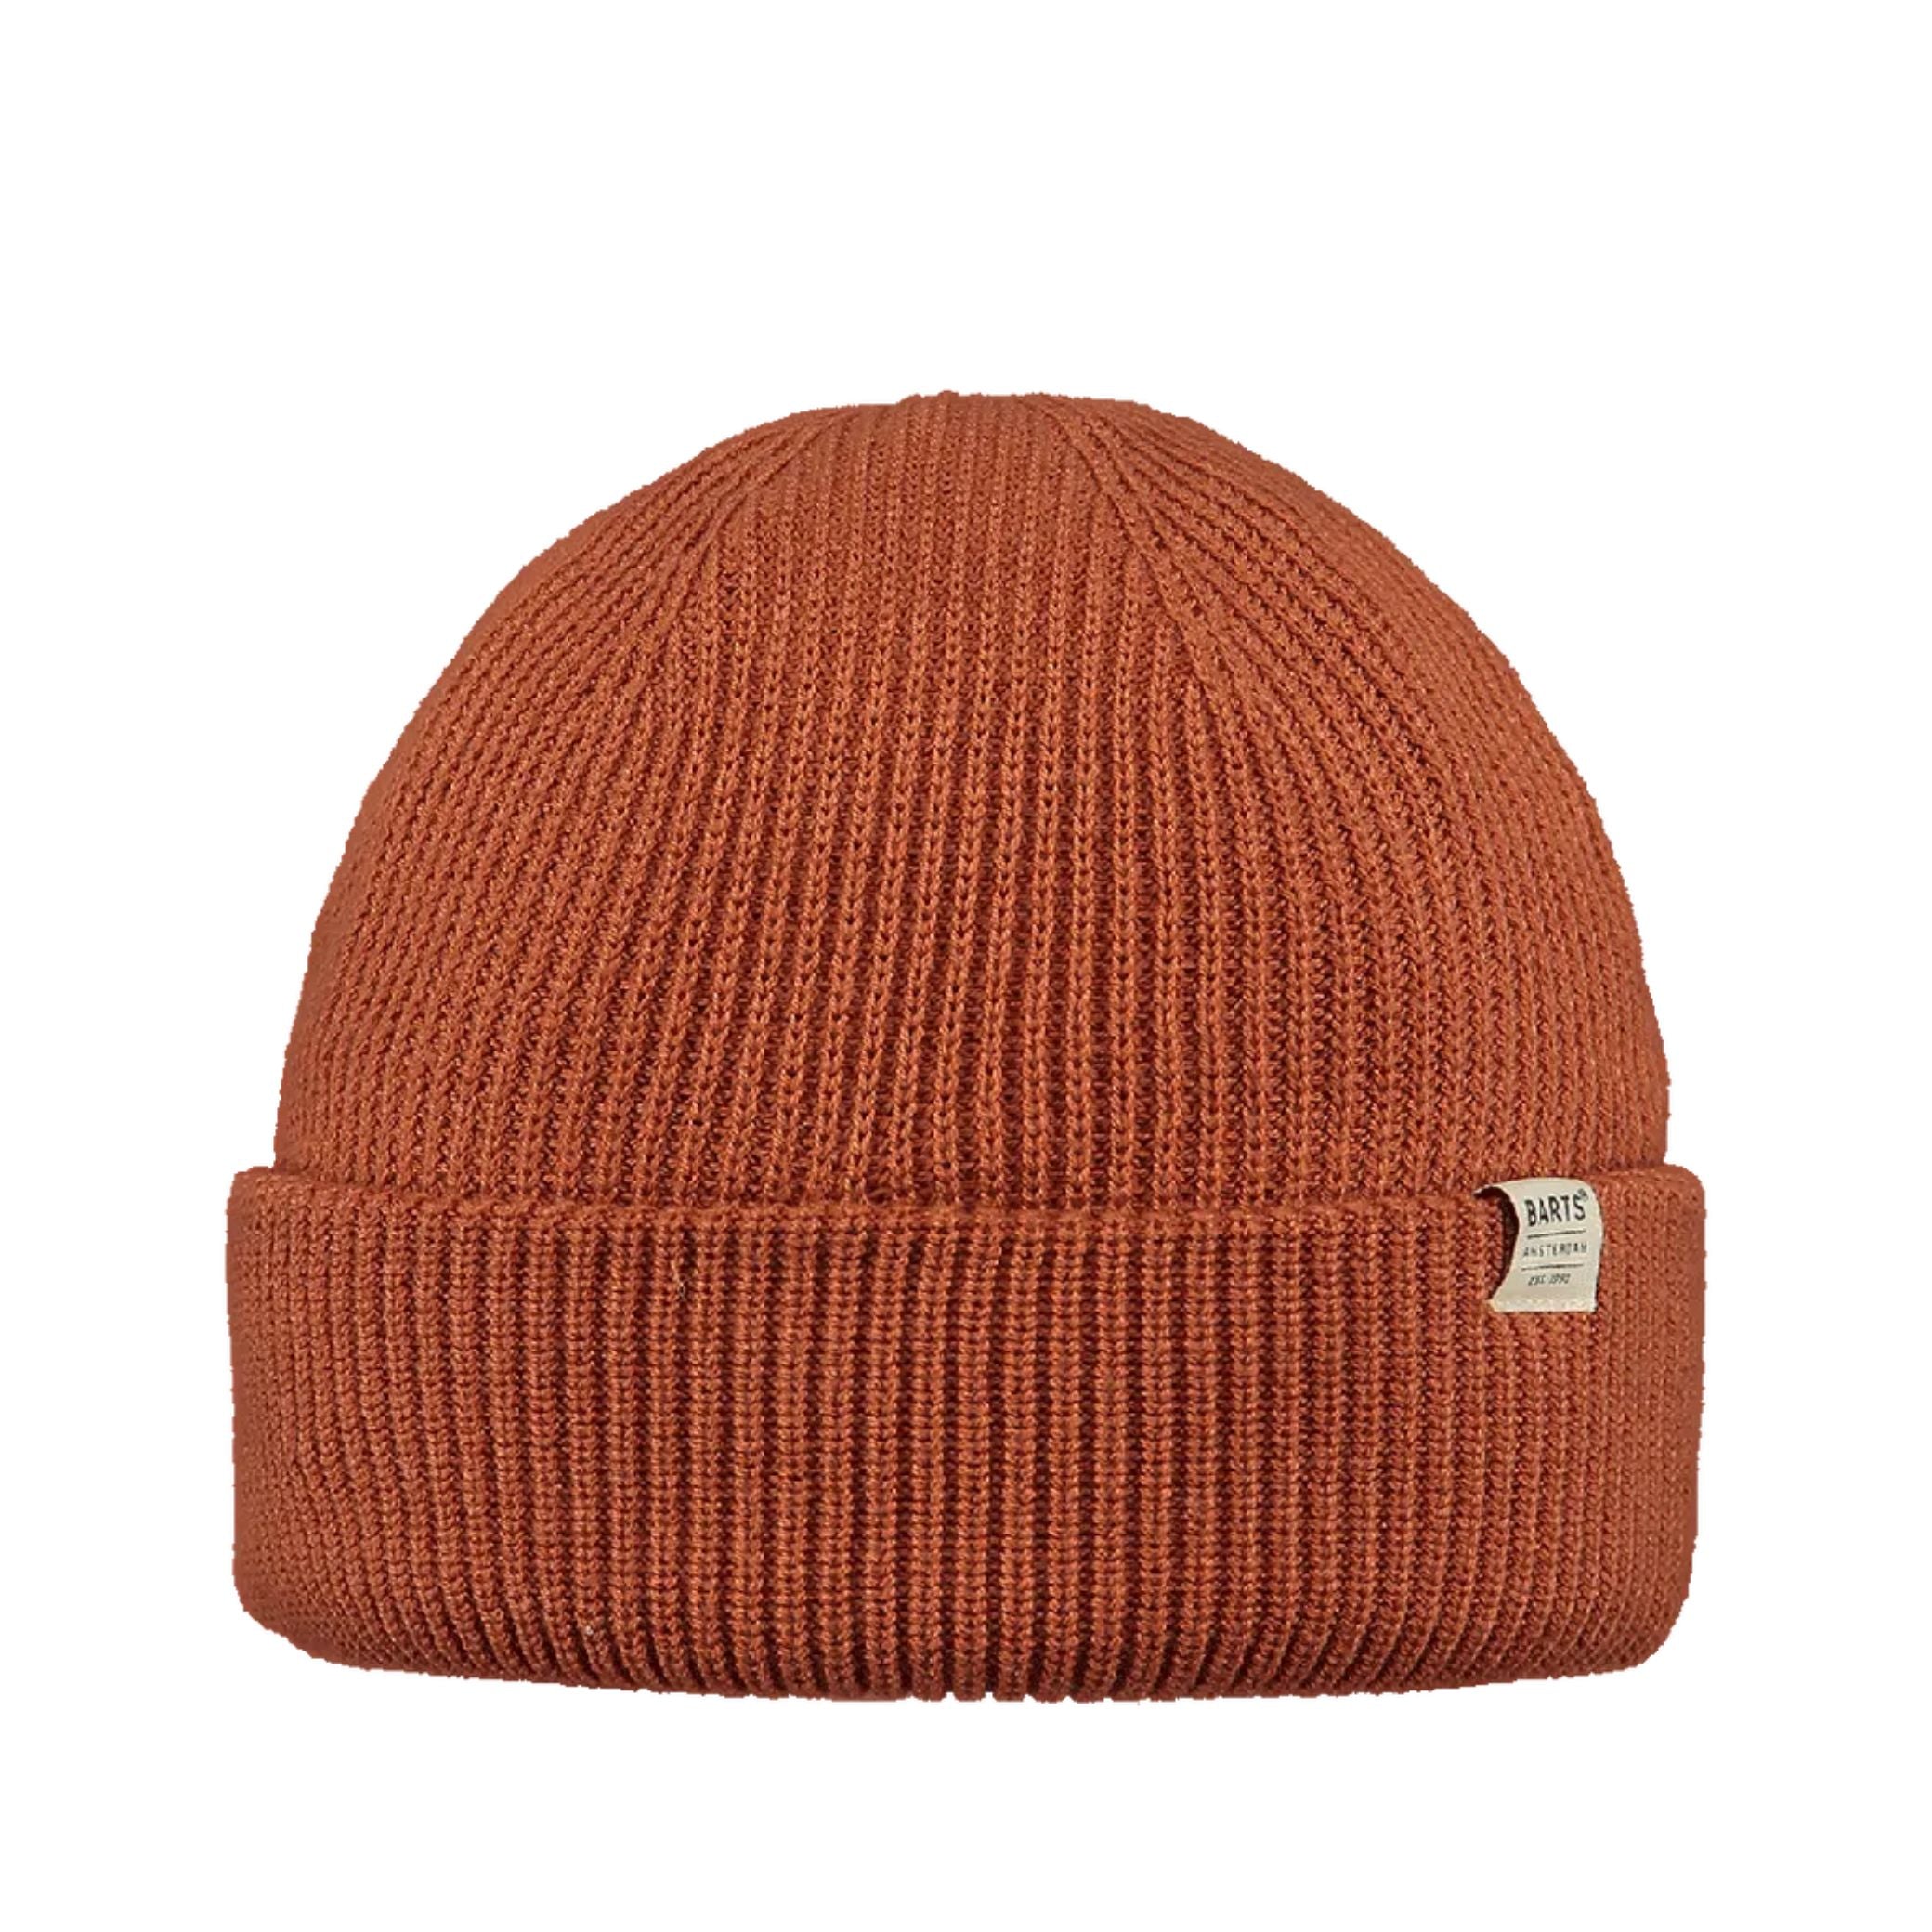 Barts Stonel Beanie | Barts | Portwest - The Outdoor Shop